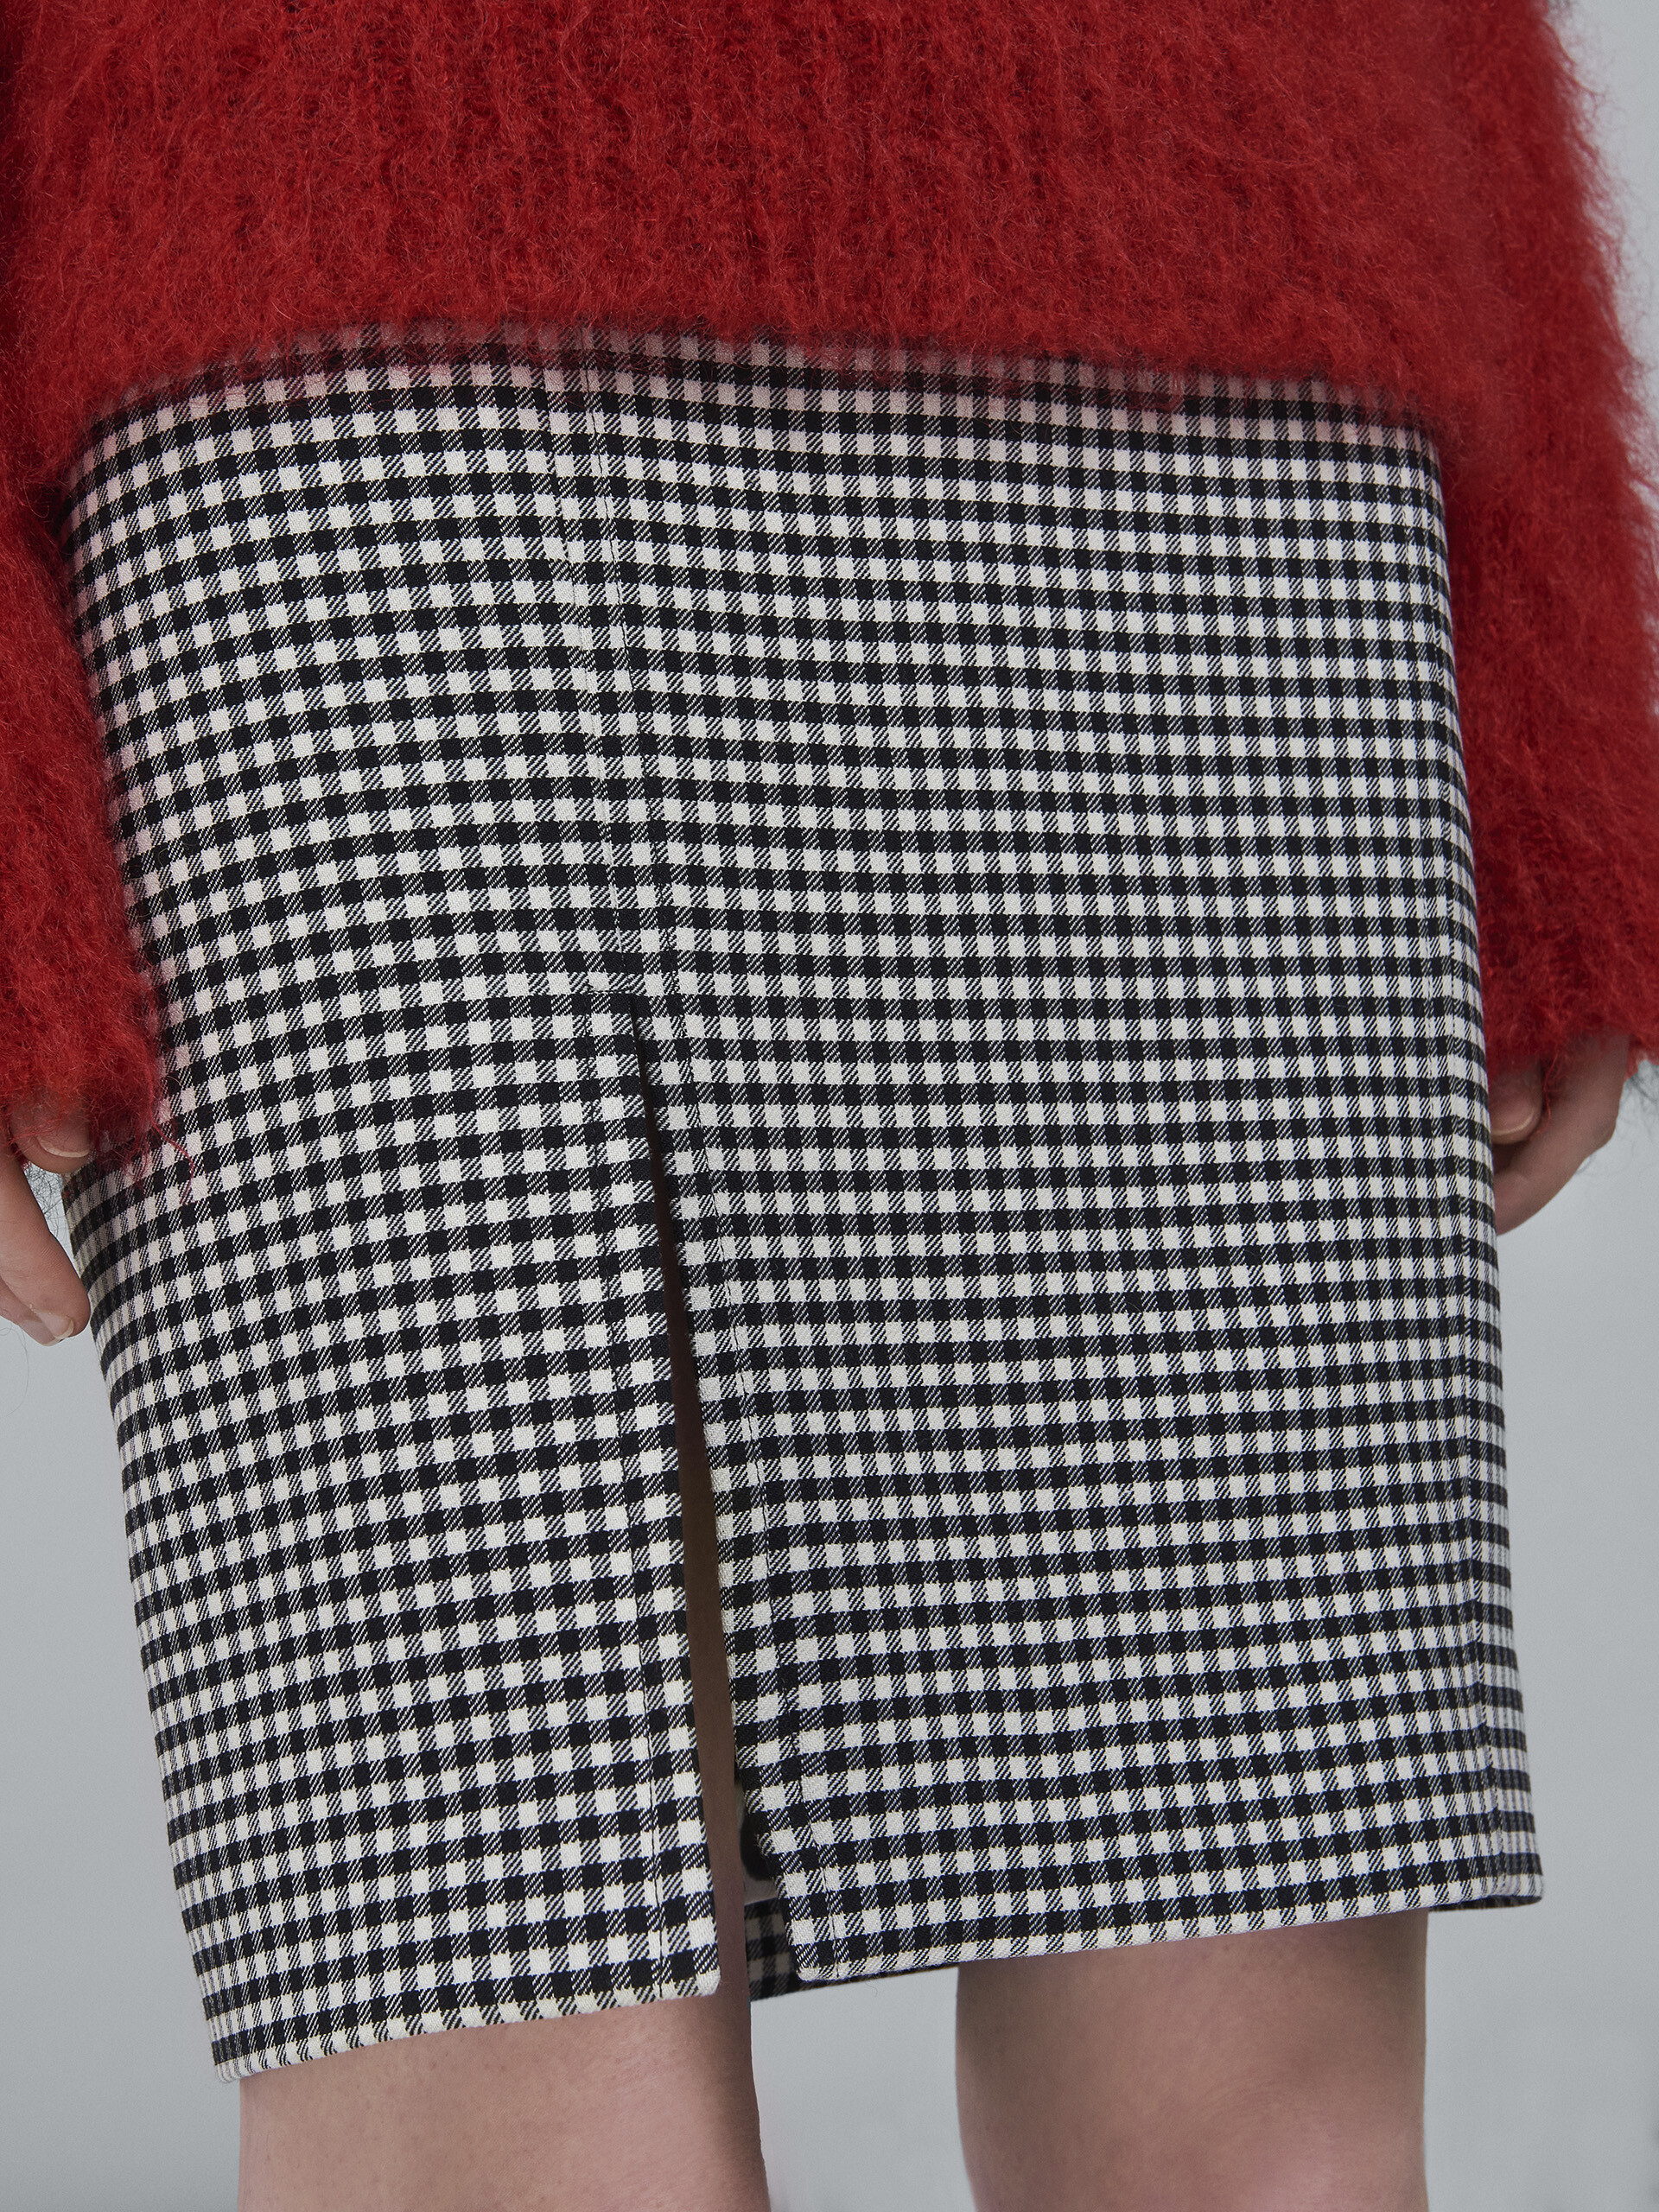 Double-faced houndstooth wool tulip skirt - Skirts - Image 4